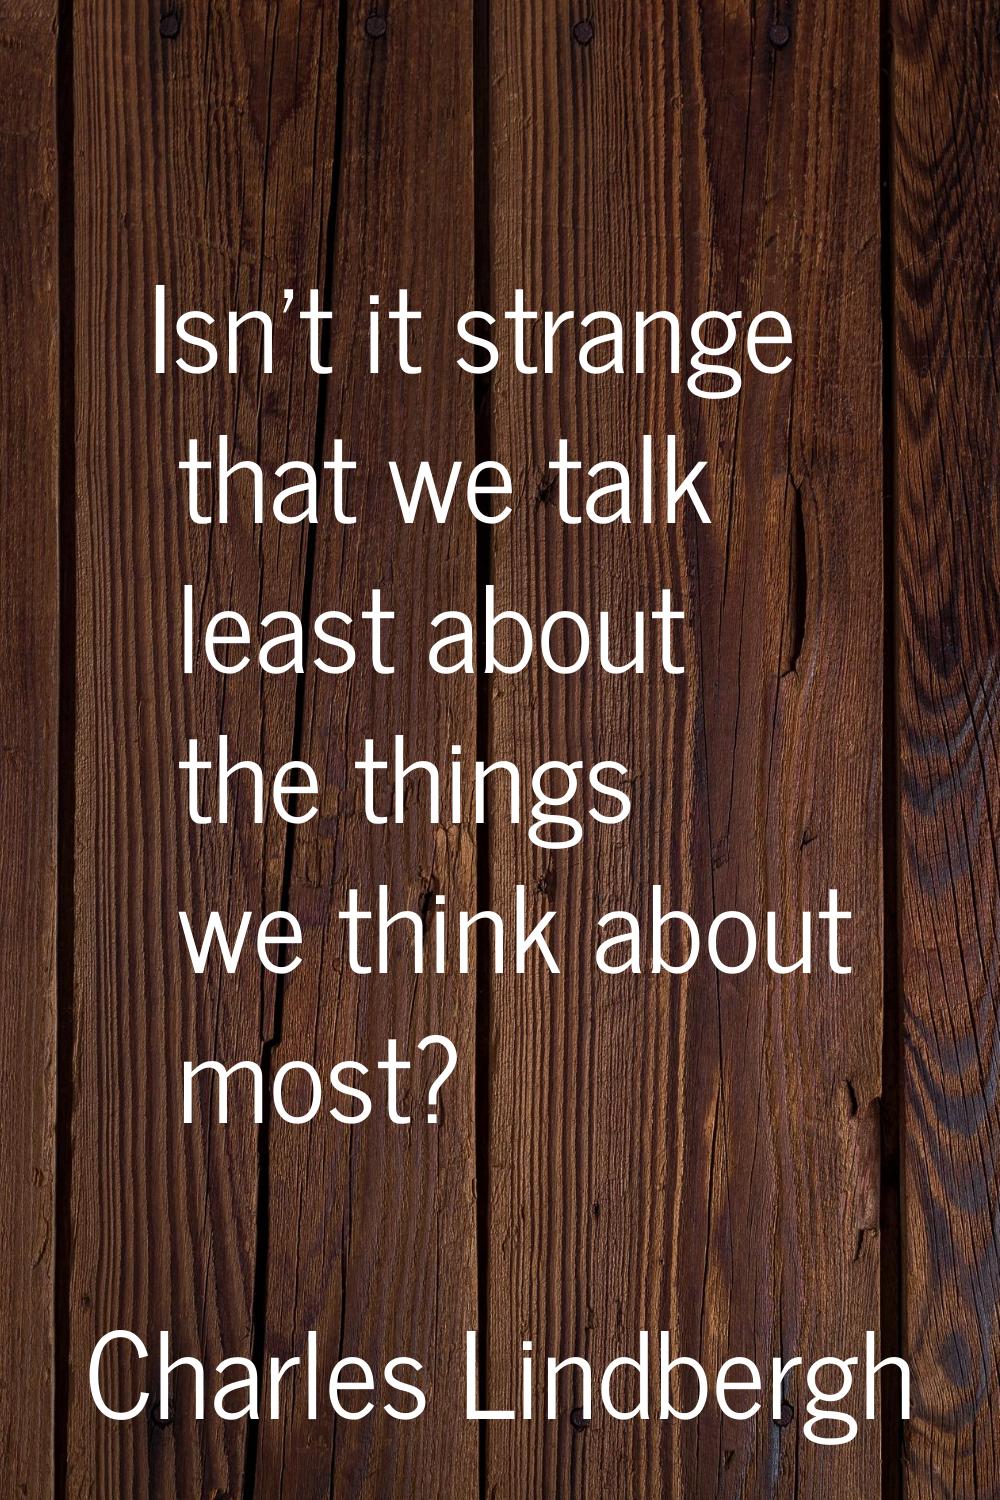 Isn't it strange that we talk least about the things we think about most?